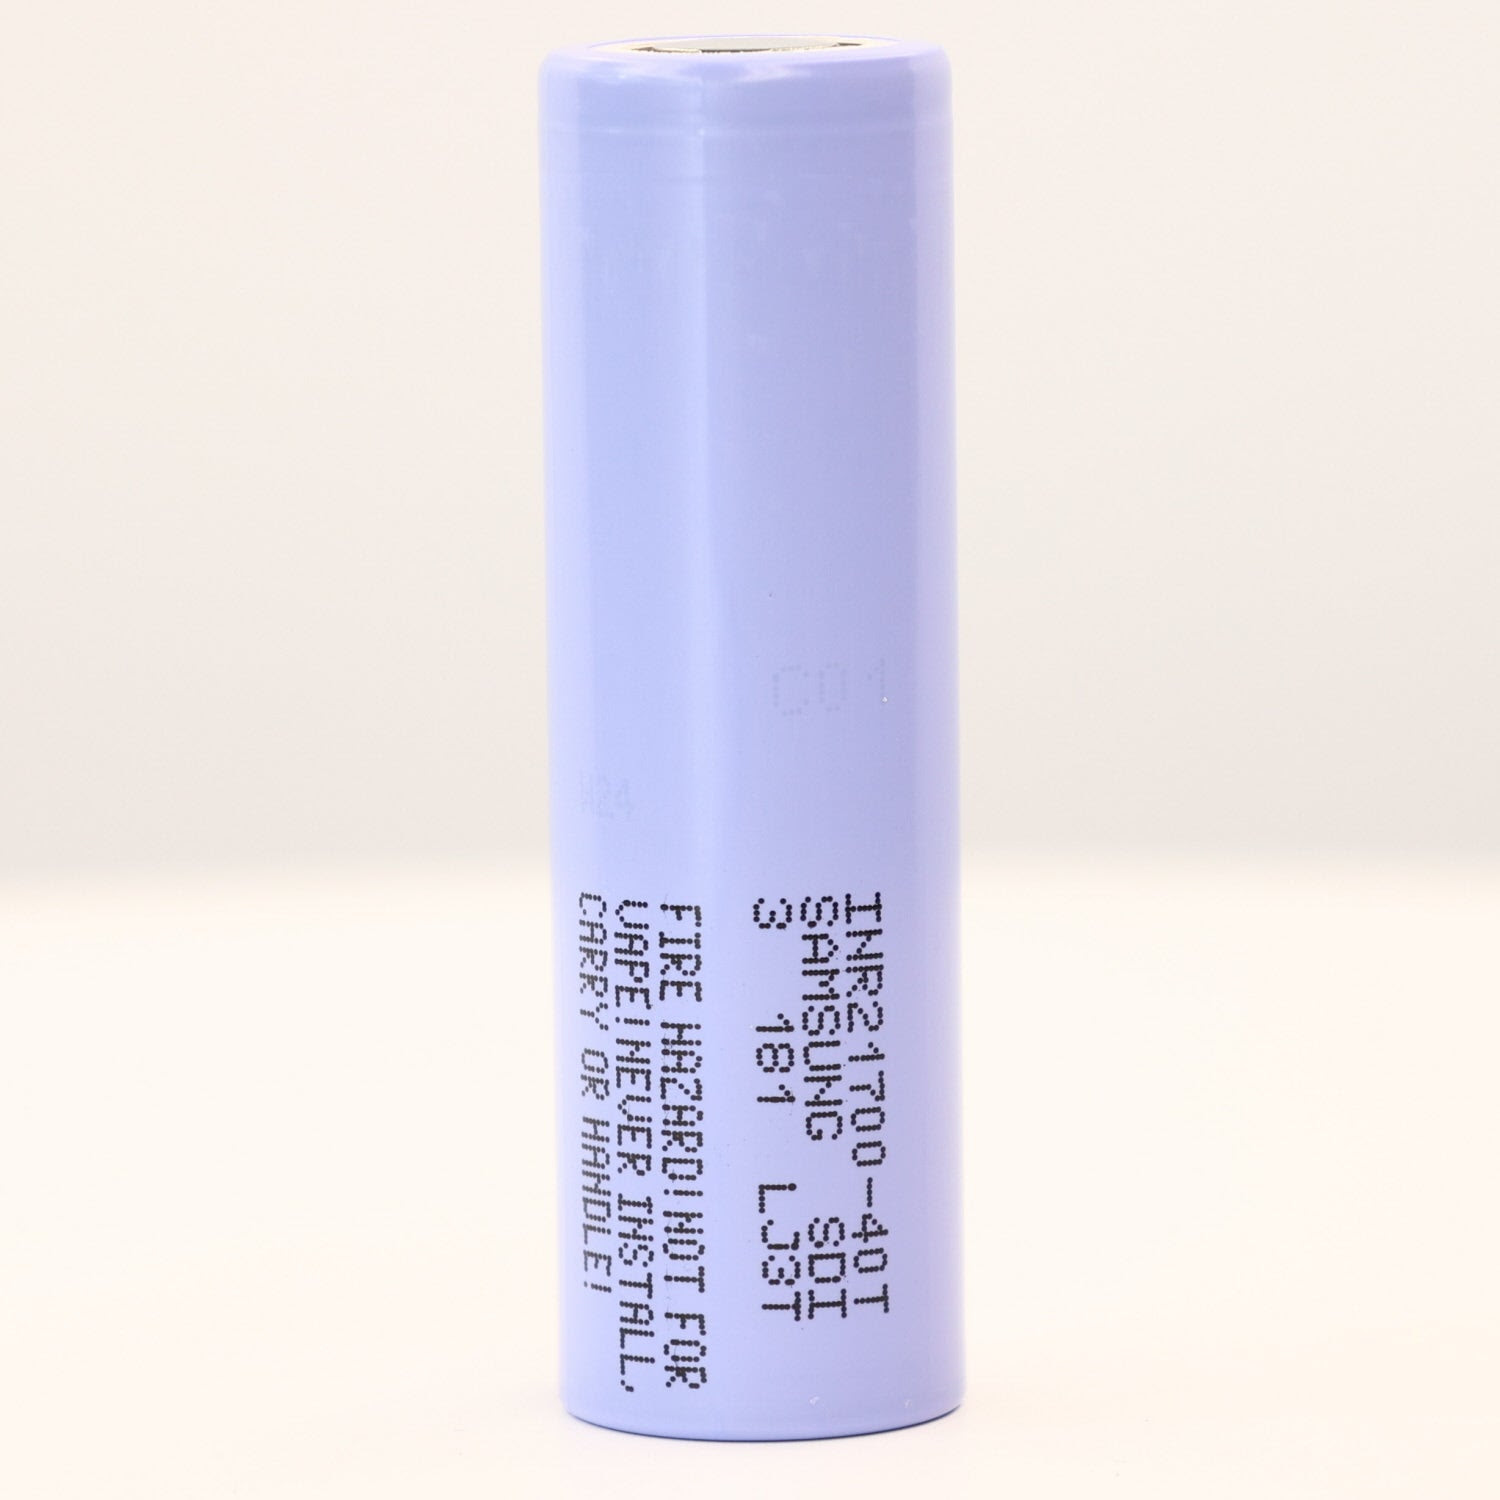 Image of Samsung 40T 21700 4000mAh 35A Battery (40T3)